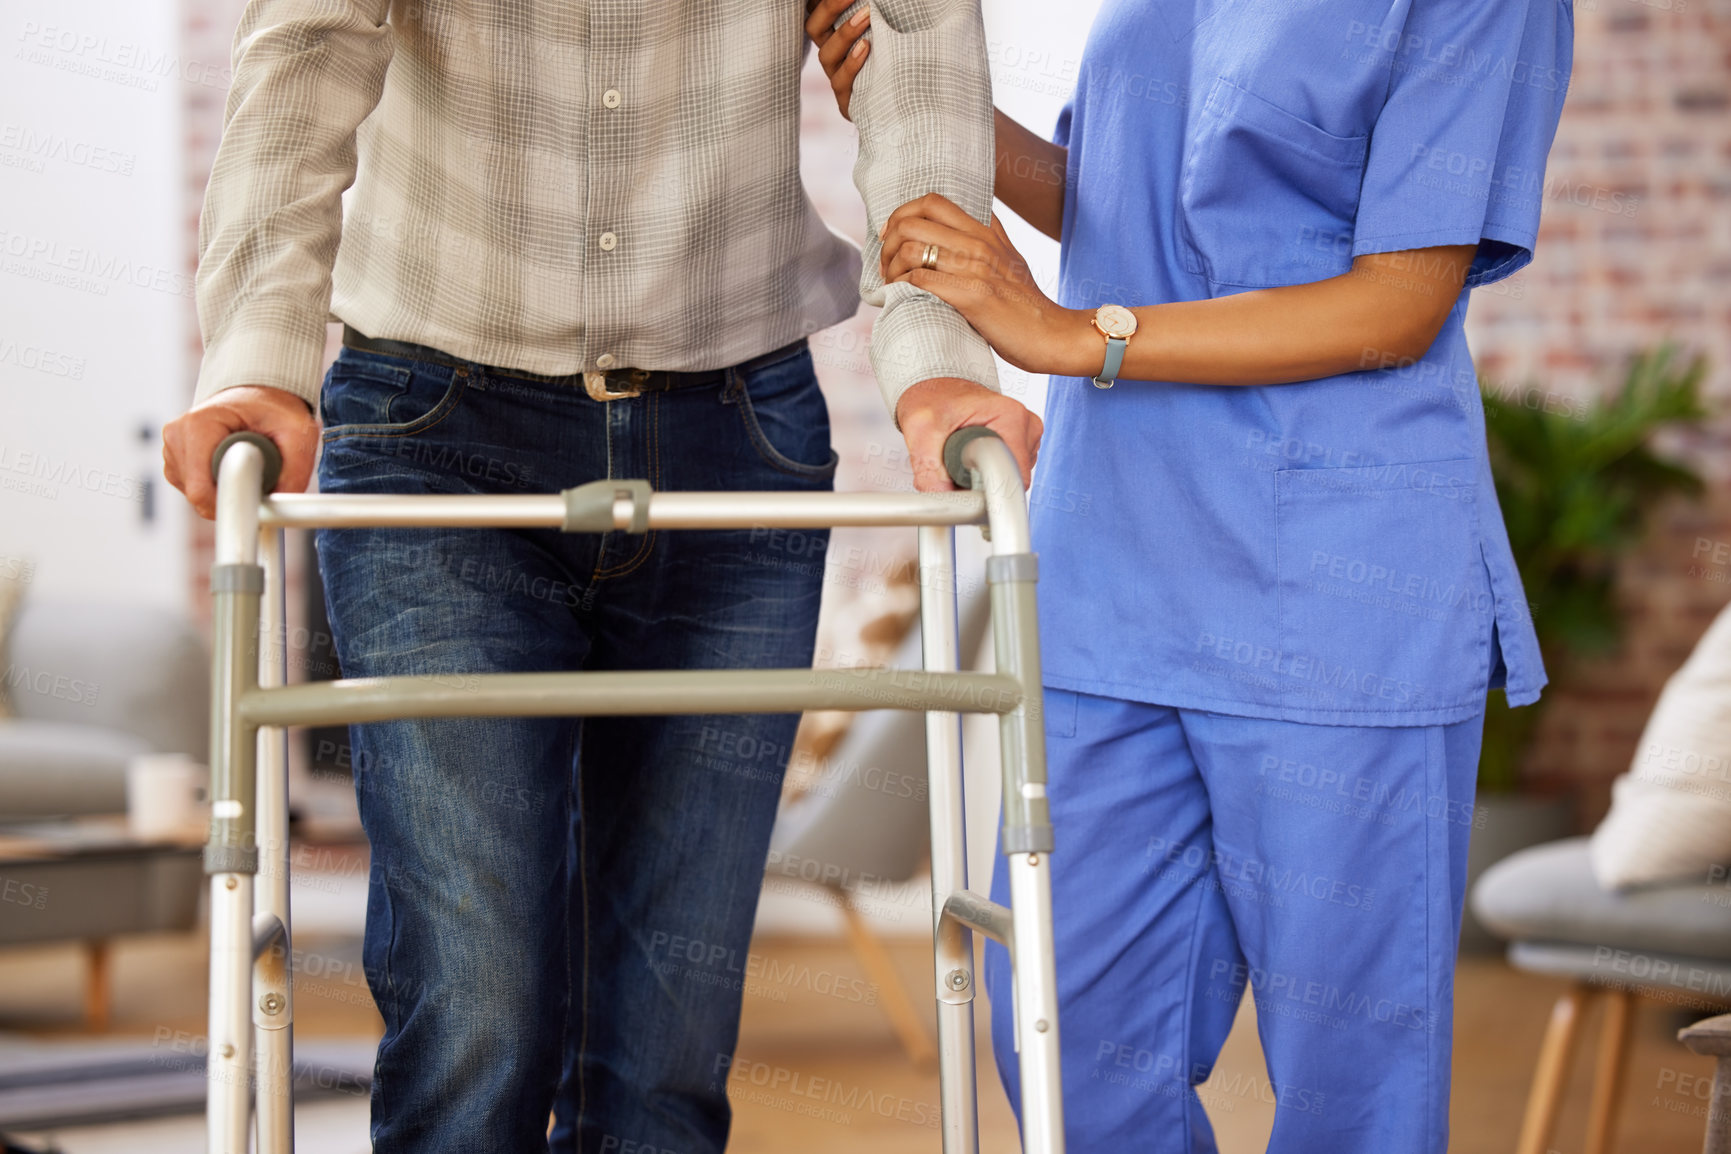 Buy stock photo Shot of a nurse helping her elderly patient use their walking frame